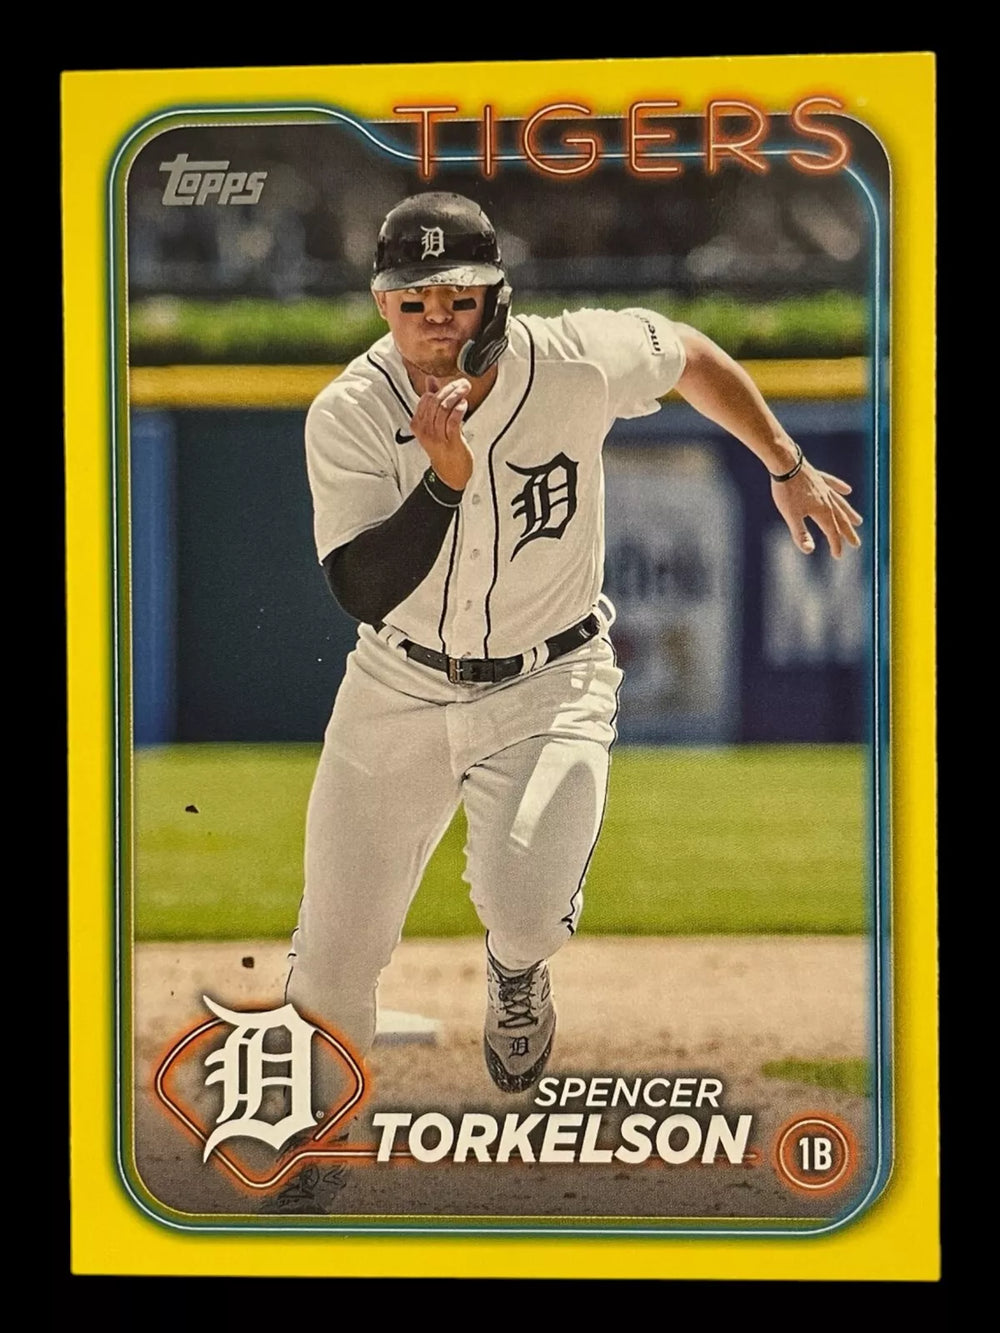 Spencer Torkelson 2024 Topps Yellow Series Mint Card #185